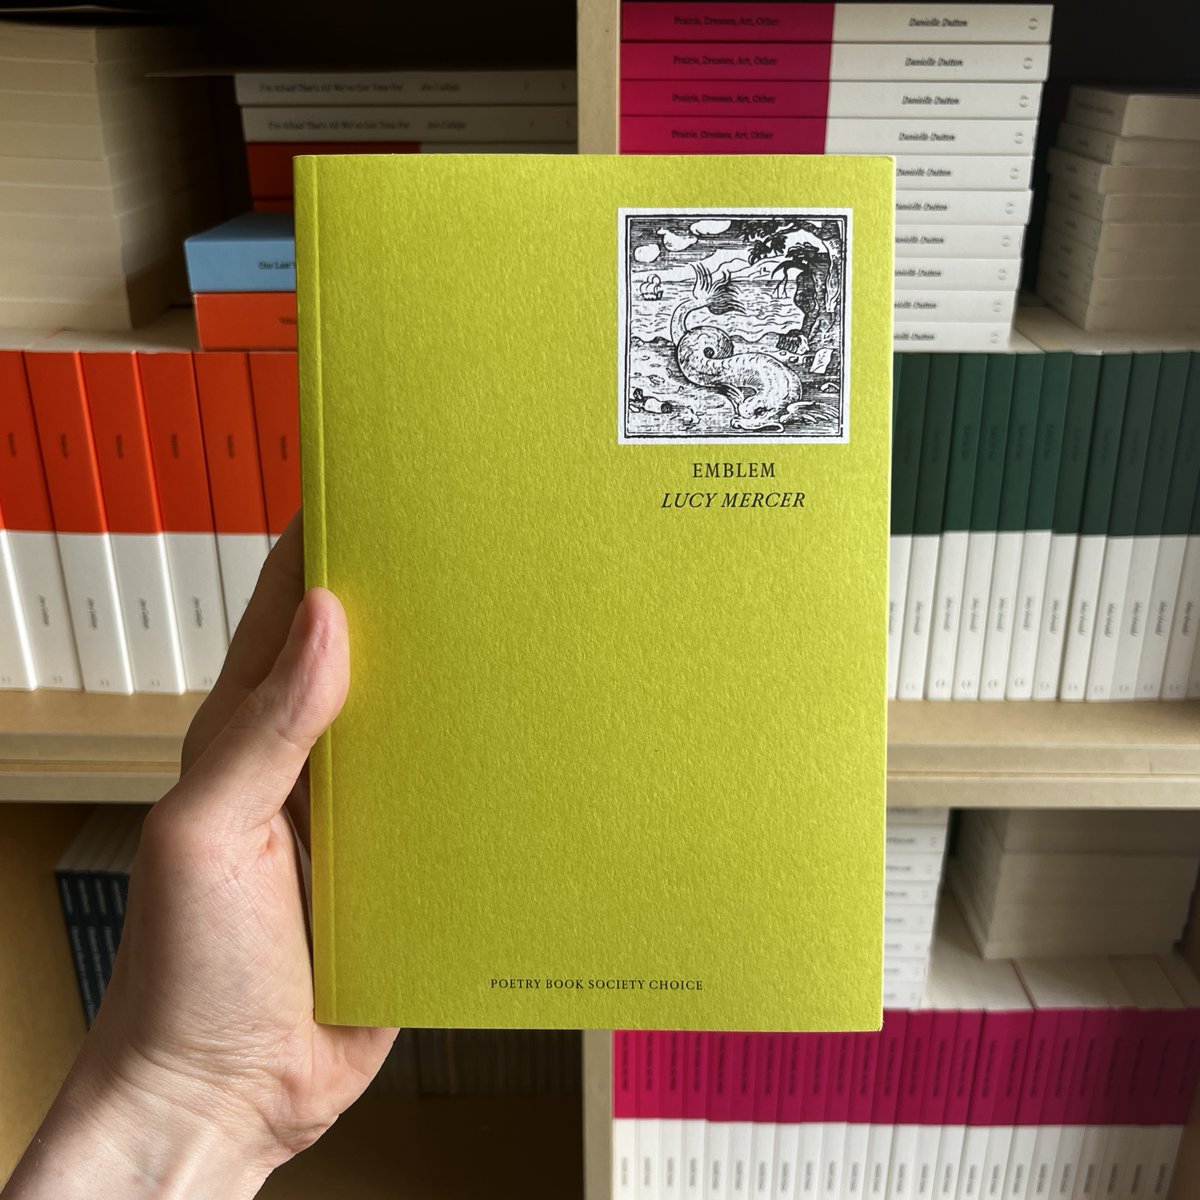 Delighted to share the second edition of Emblem by Lucy Mercer. We’re so happy to have this wonderful collection back in stock with a beautiful new cover. Emblem was The Poetry Book Society’s Summer 2022 Choice. The new edition is available now: prototypepublishing.co.uk/product/emblem/